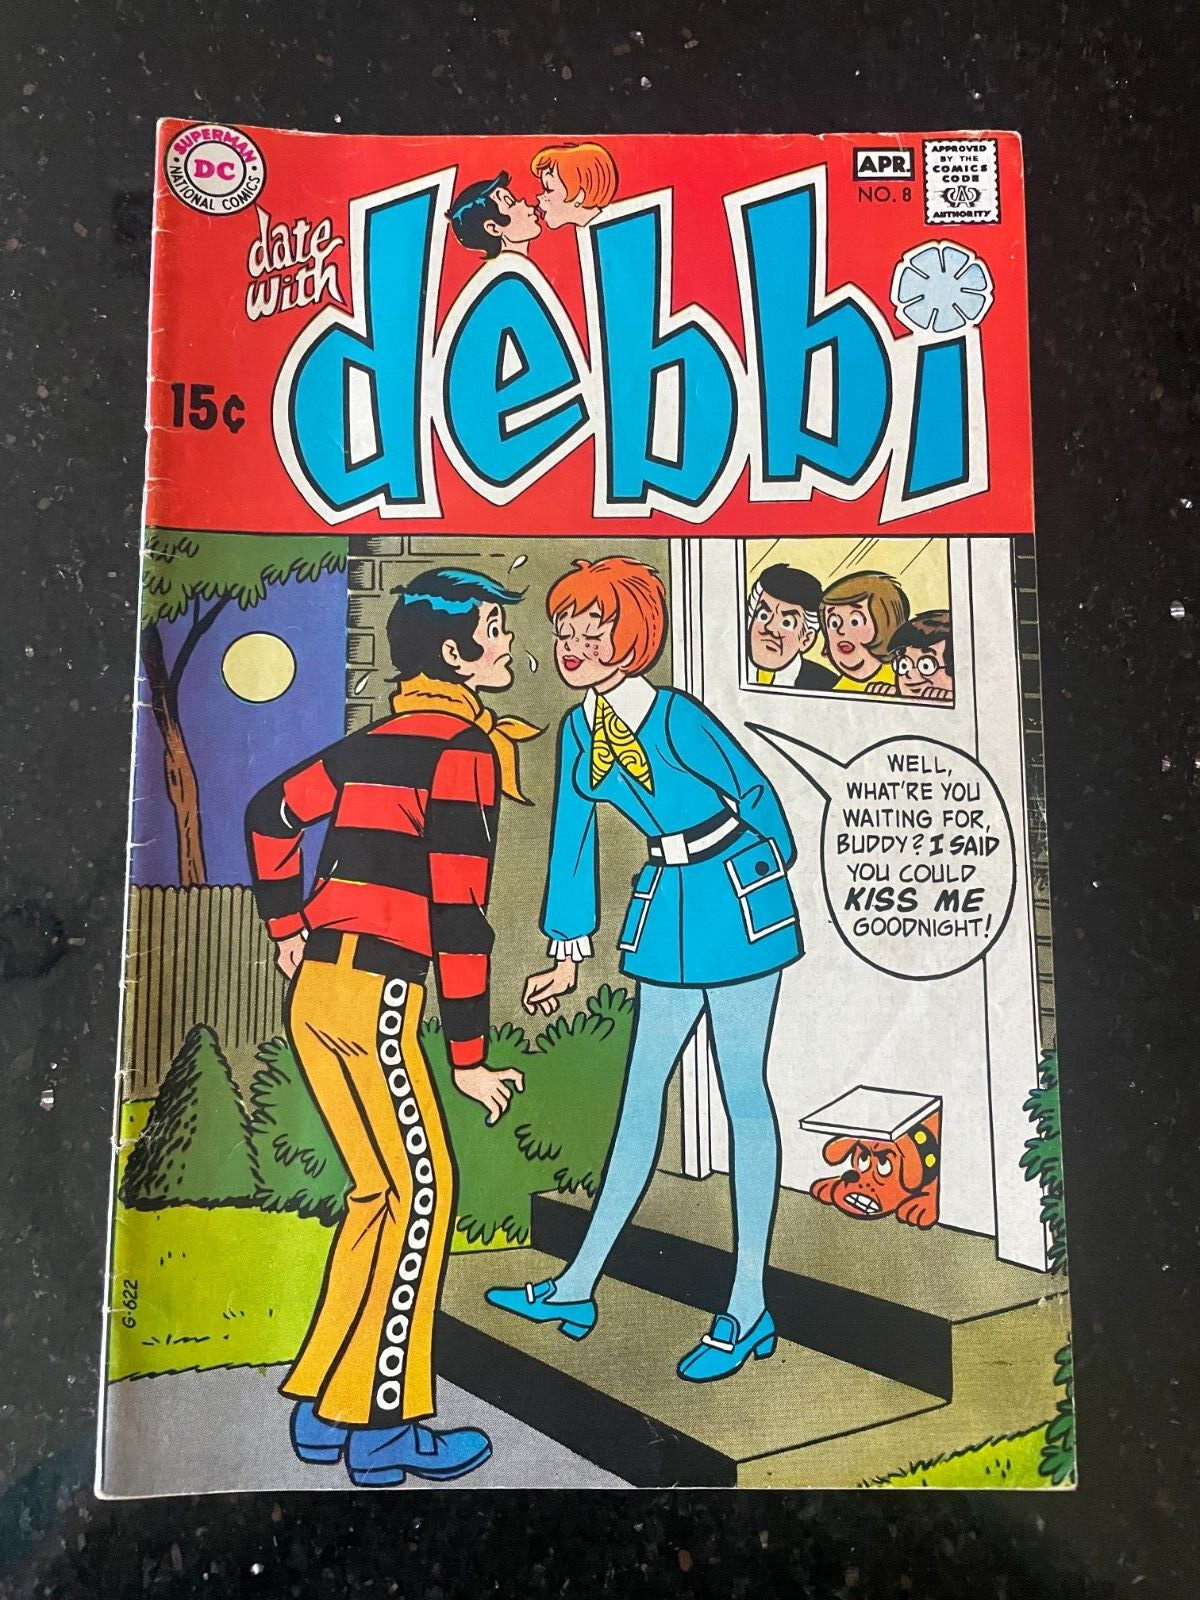 DC-Date With Debbi-1970-#8-Archie style humor-GGA-Flowers psychedelic story-VG